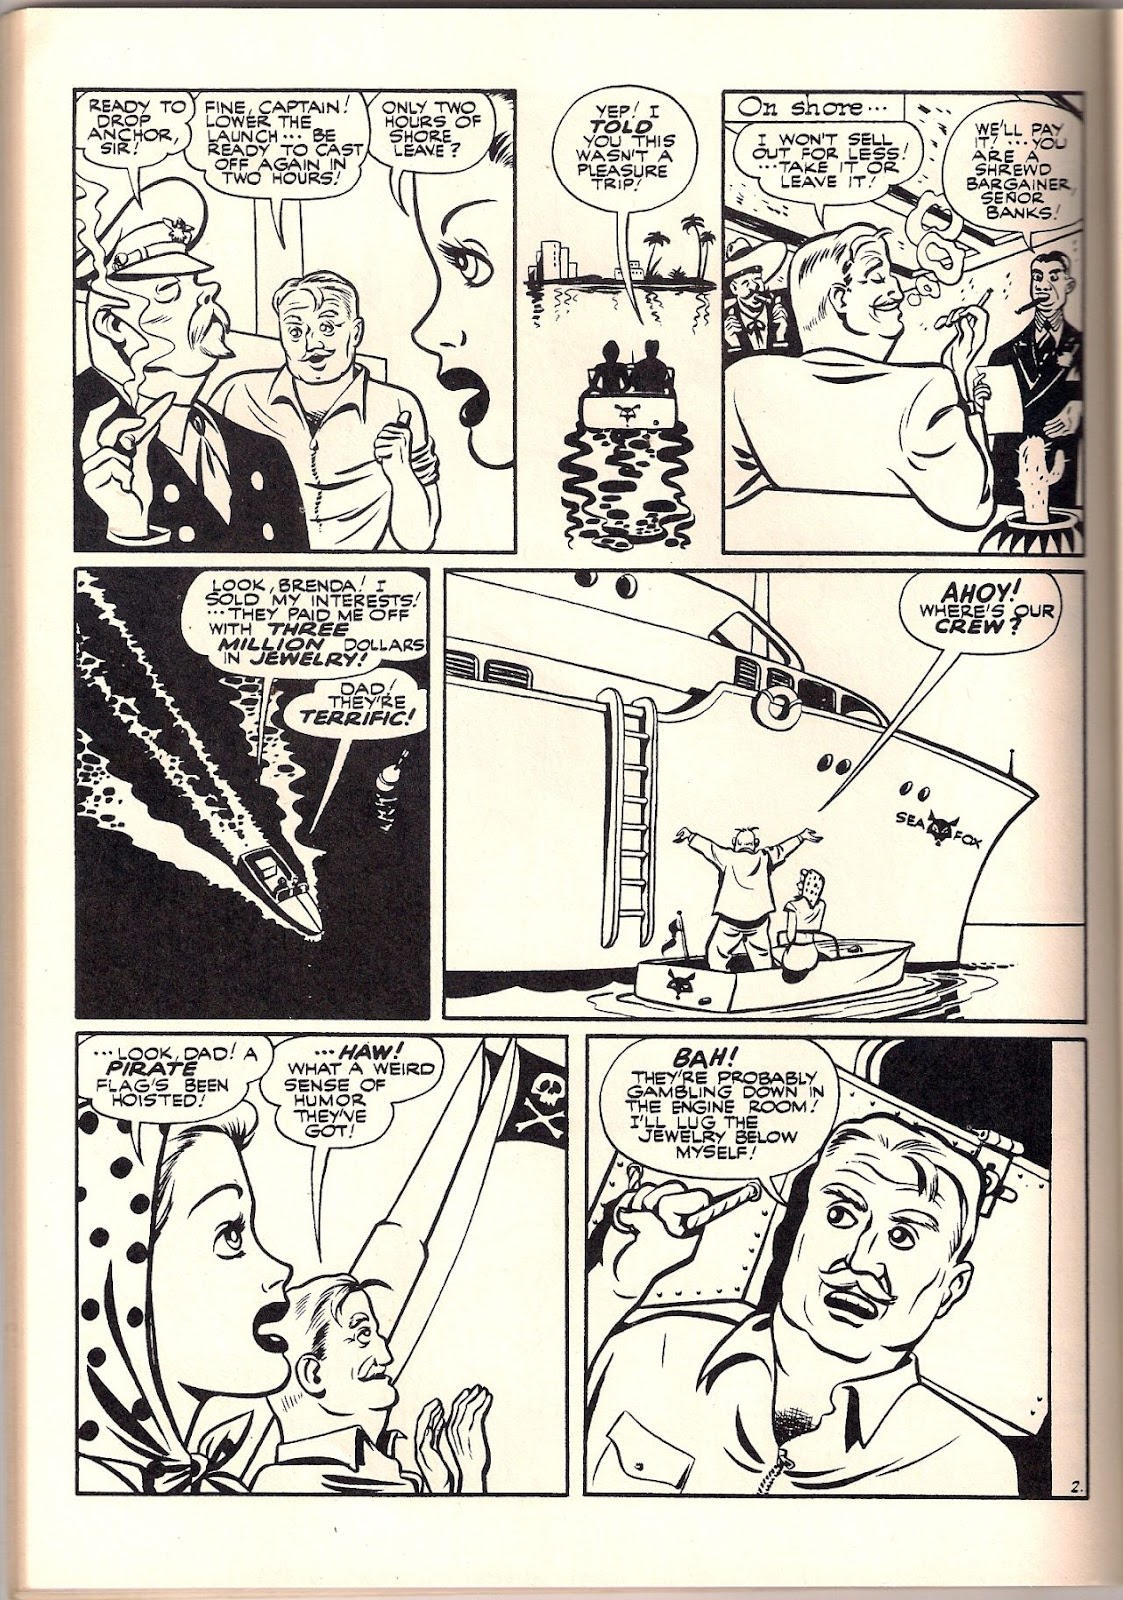 Lady Luck (1980) issue 1 - Page 12